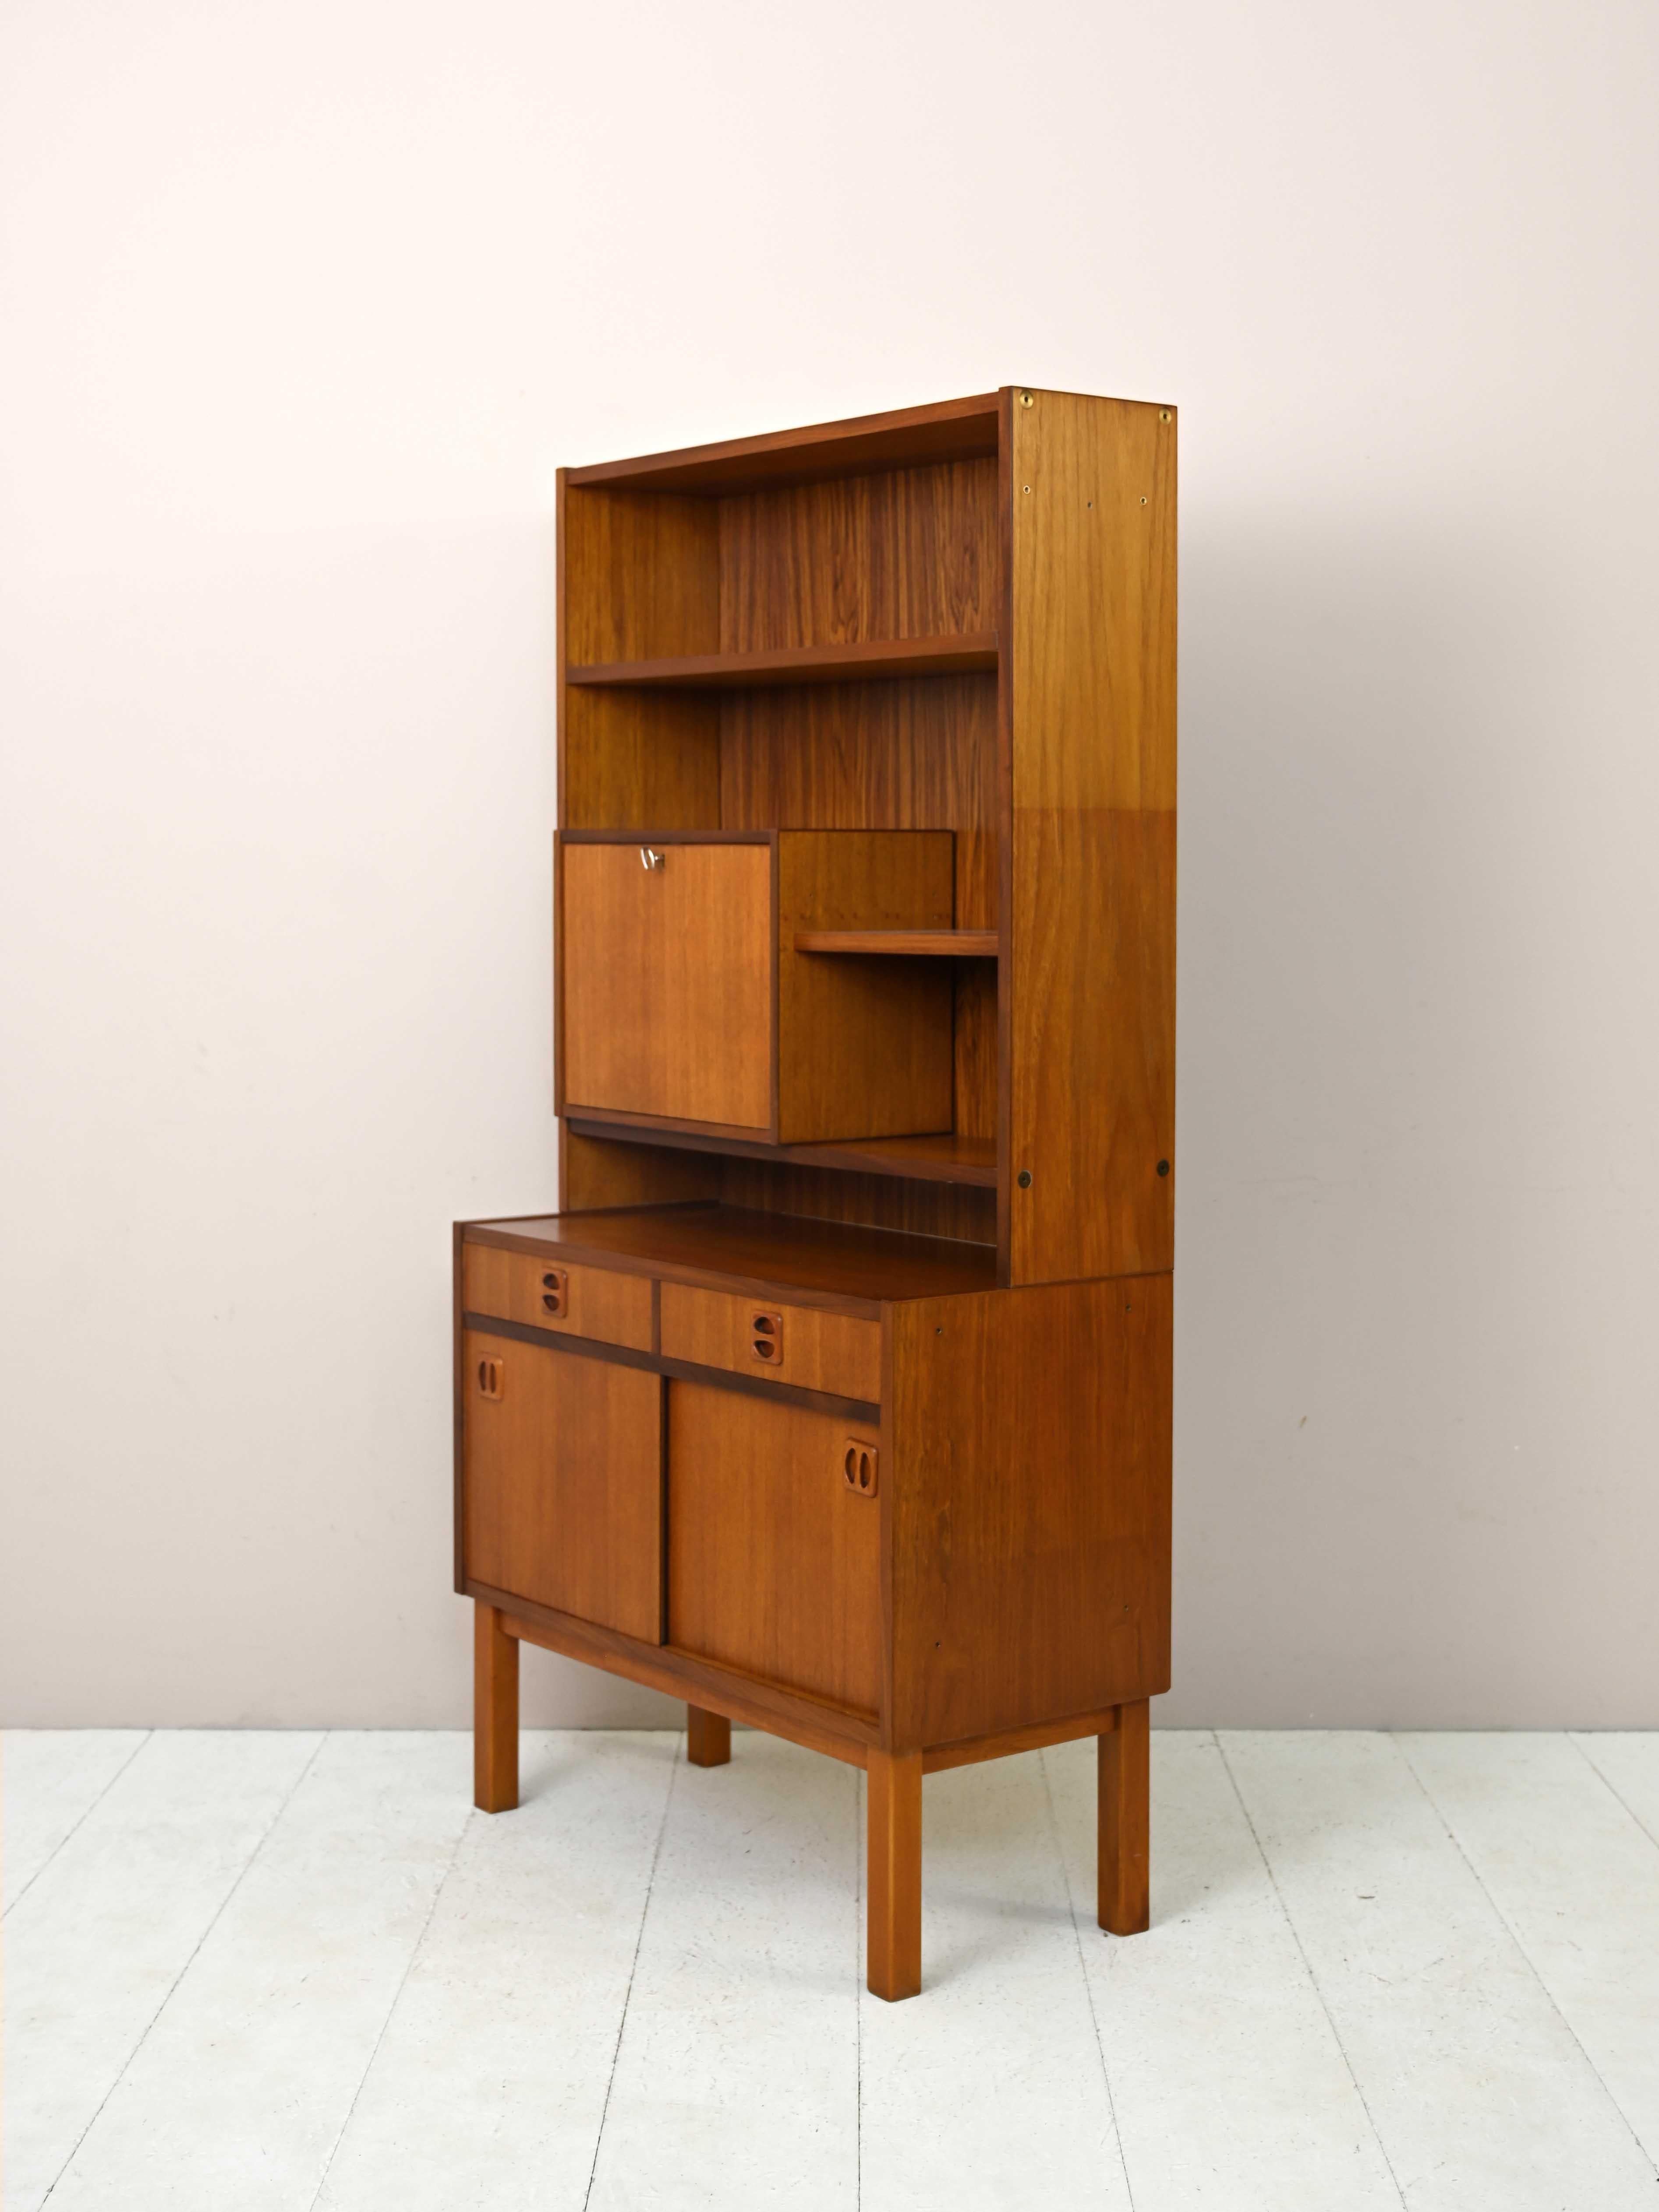 Wood Scandinavian Bookcase with Bar Compartment